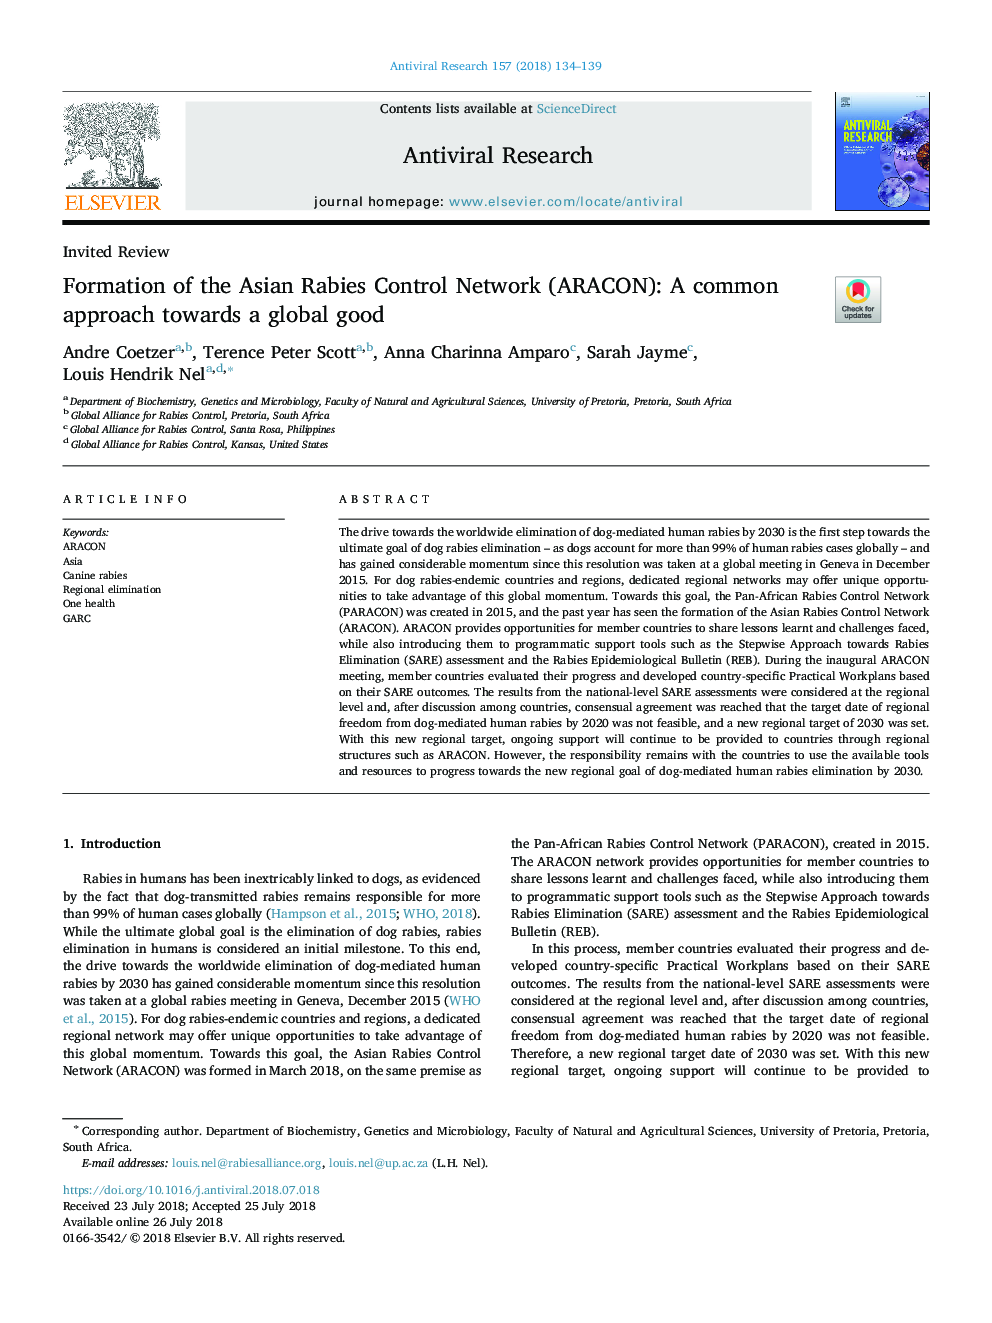 Formation of the Asian Rabies Control Network (ARACON): A common approach towards a global good